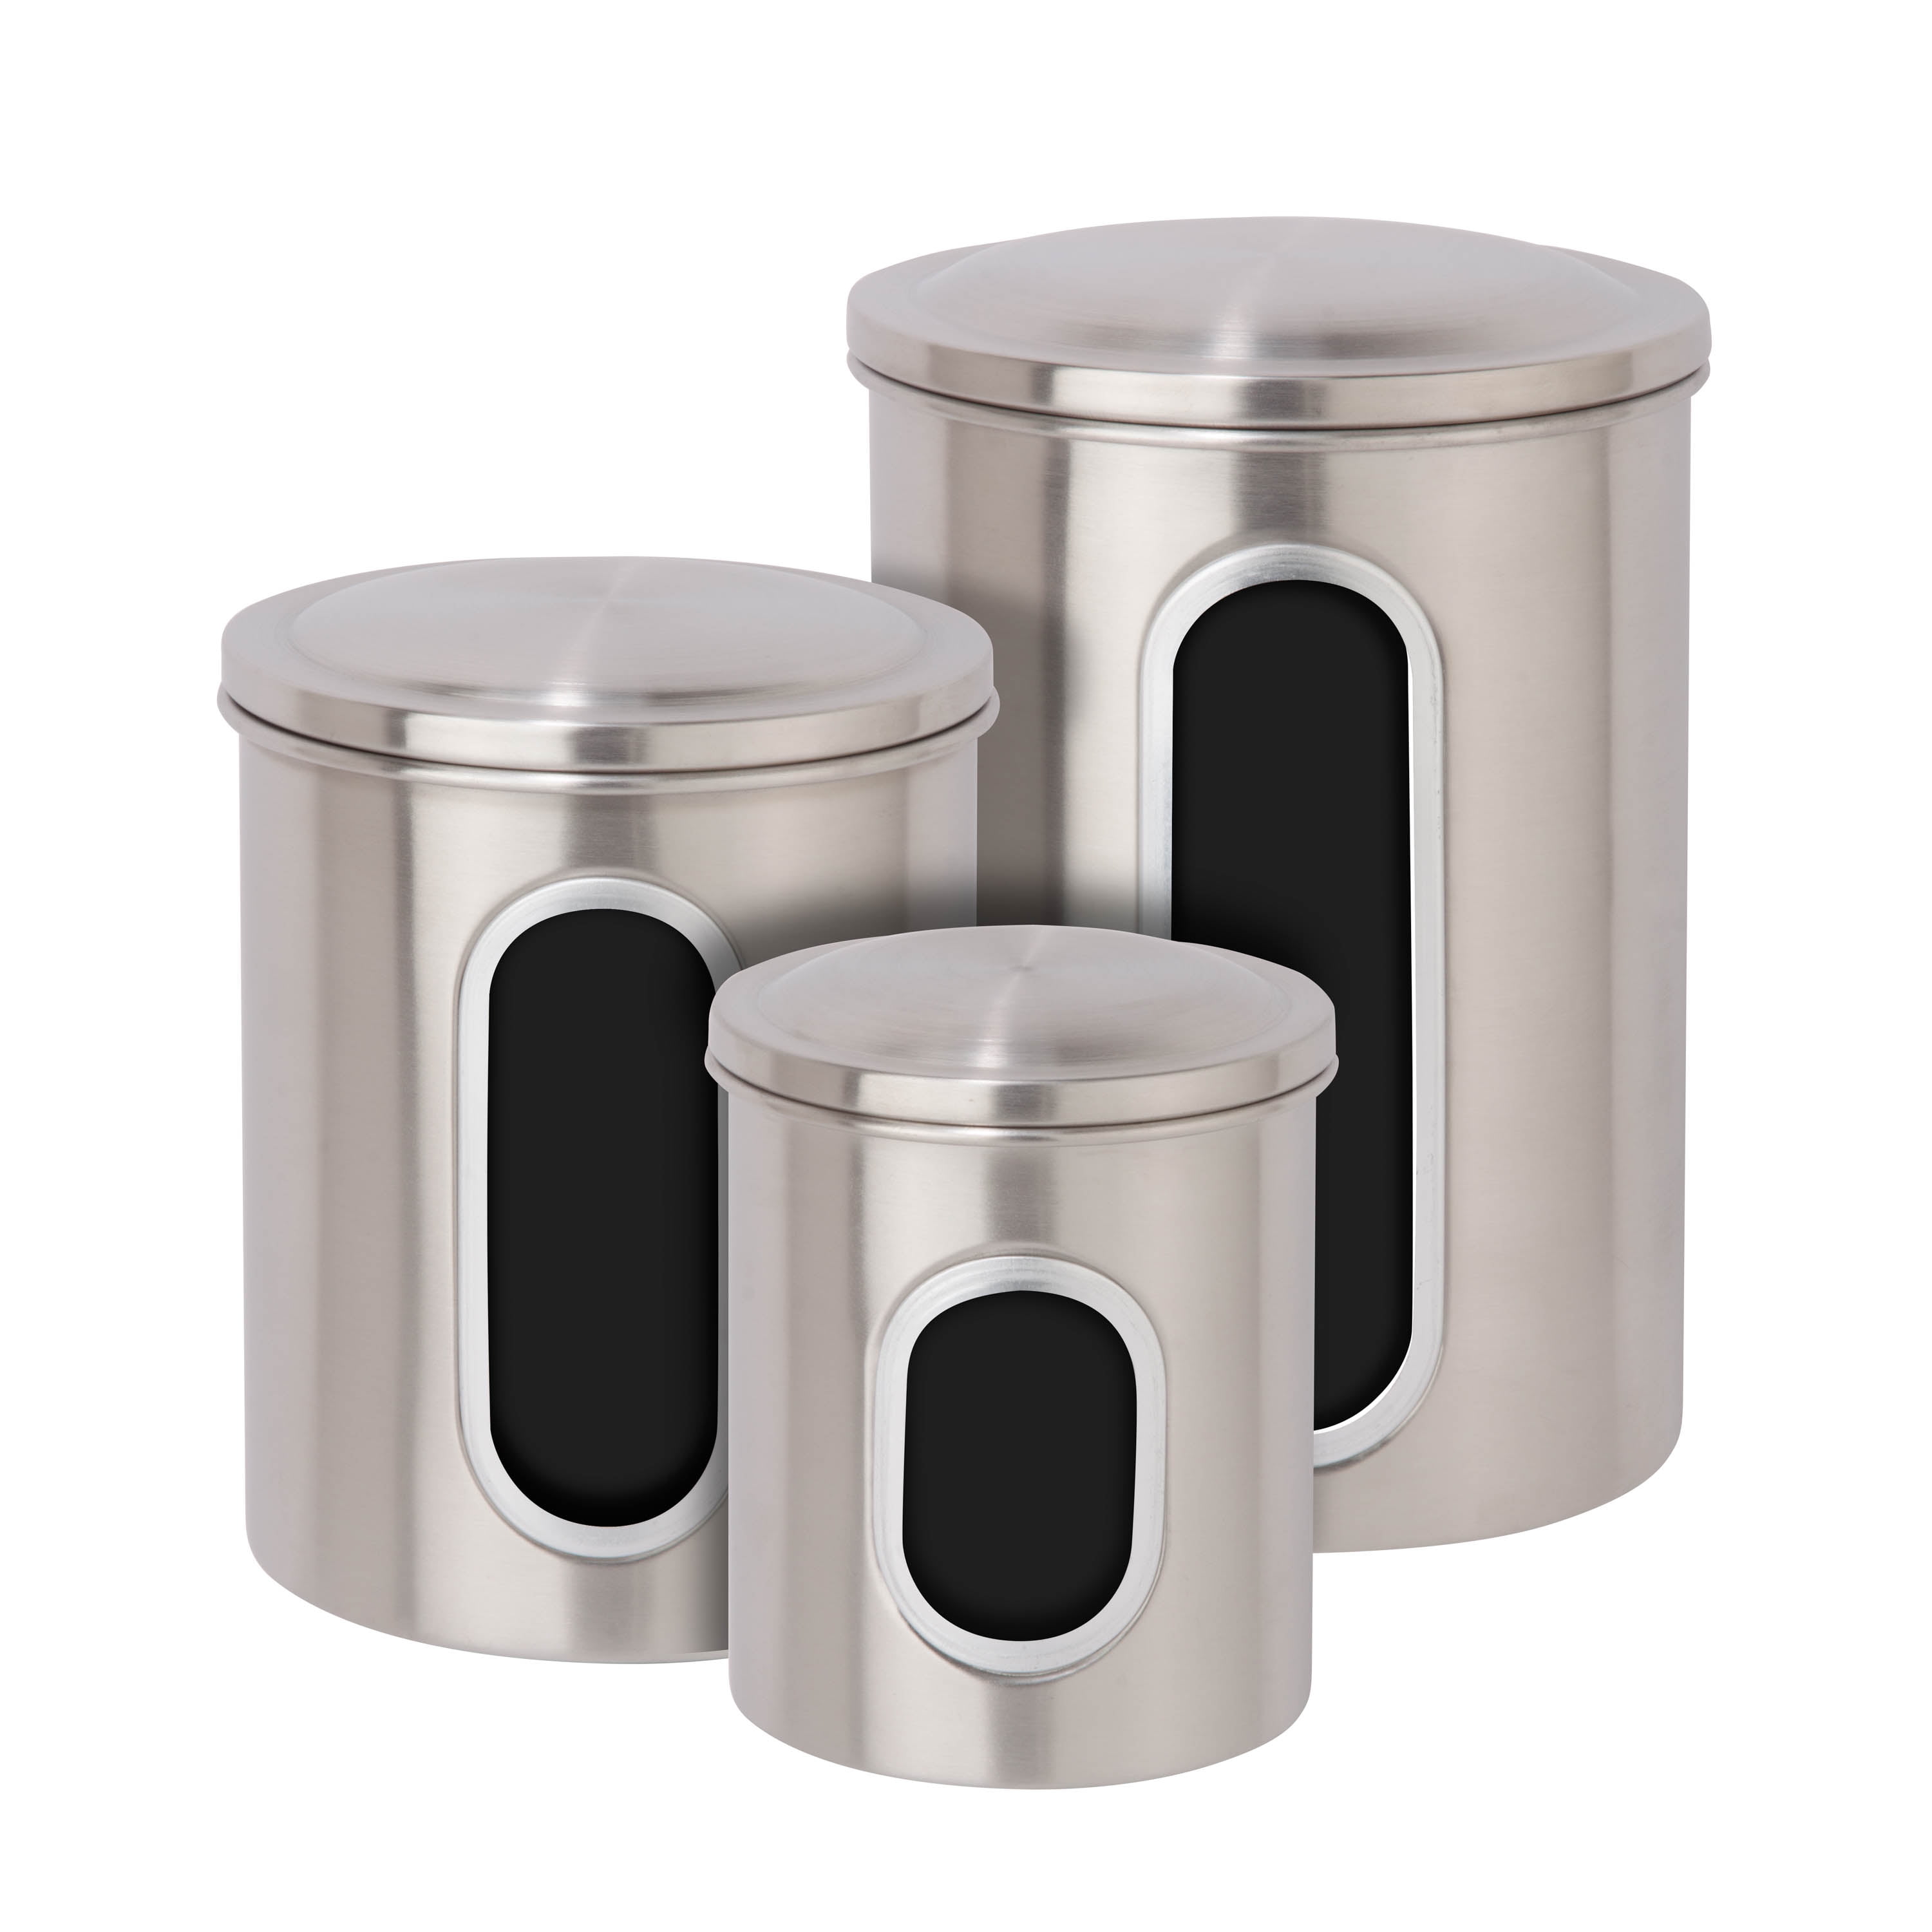 U-Konserve Round Nesting Trio Stainless Steel Container - Sky, 3 pc -  Baker's